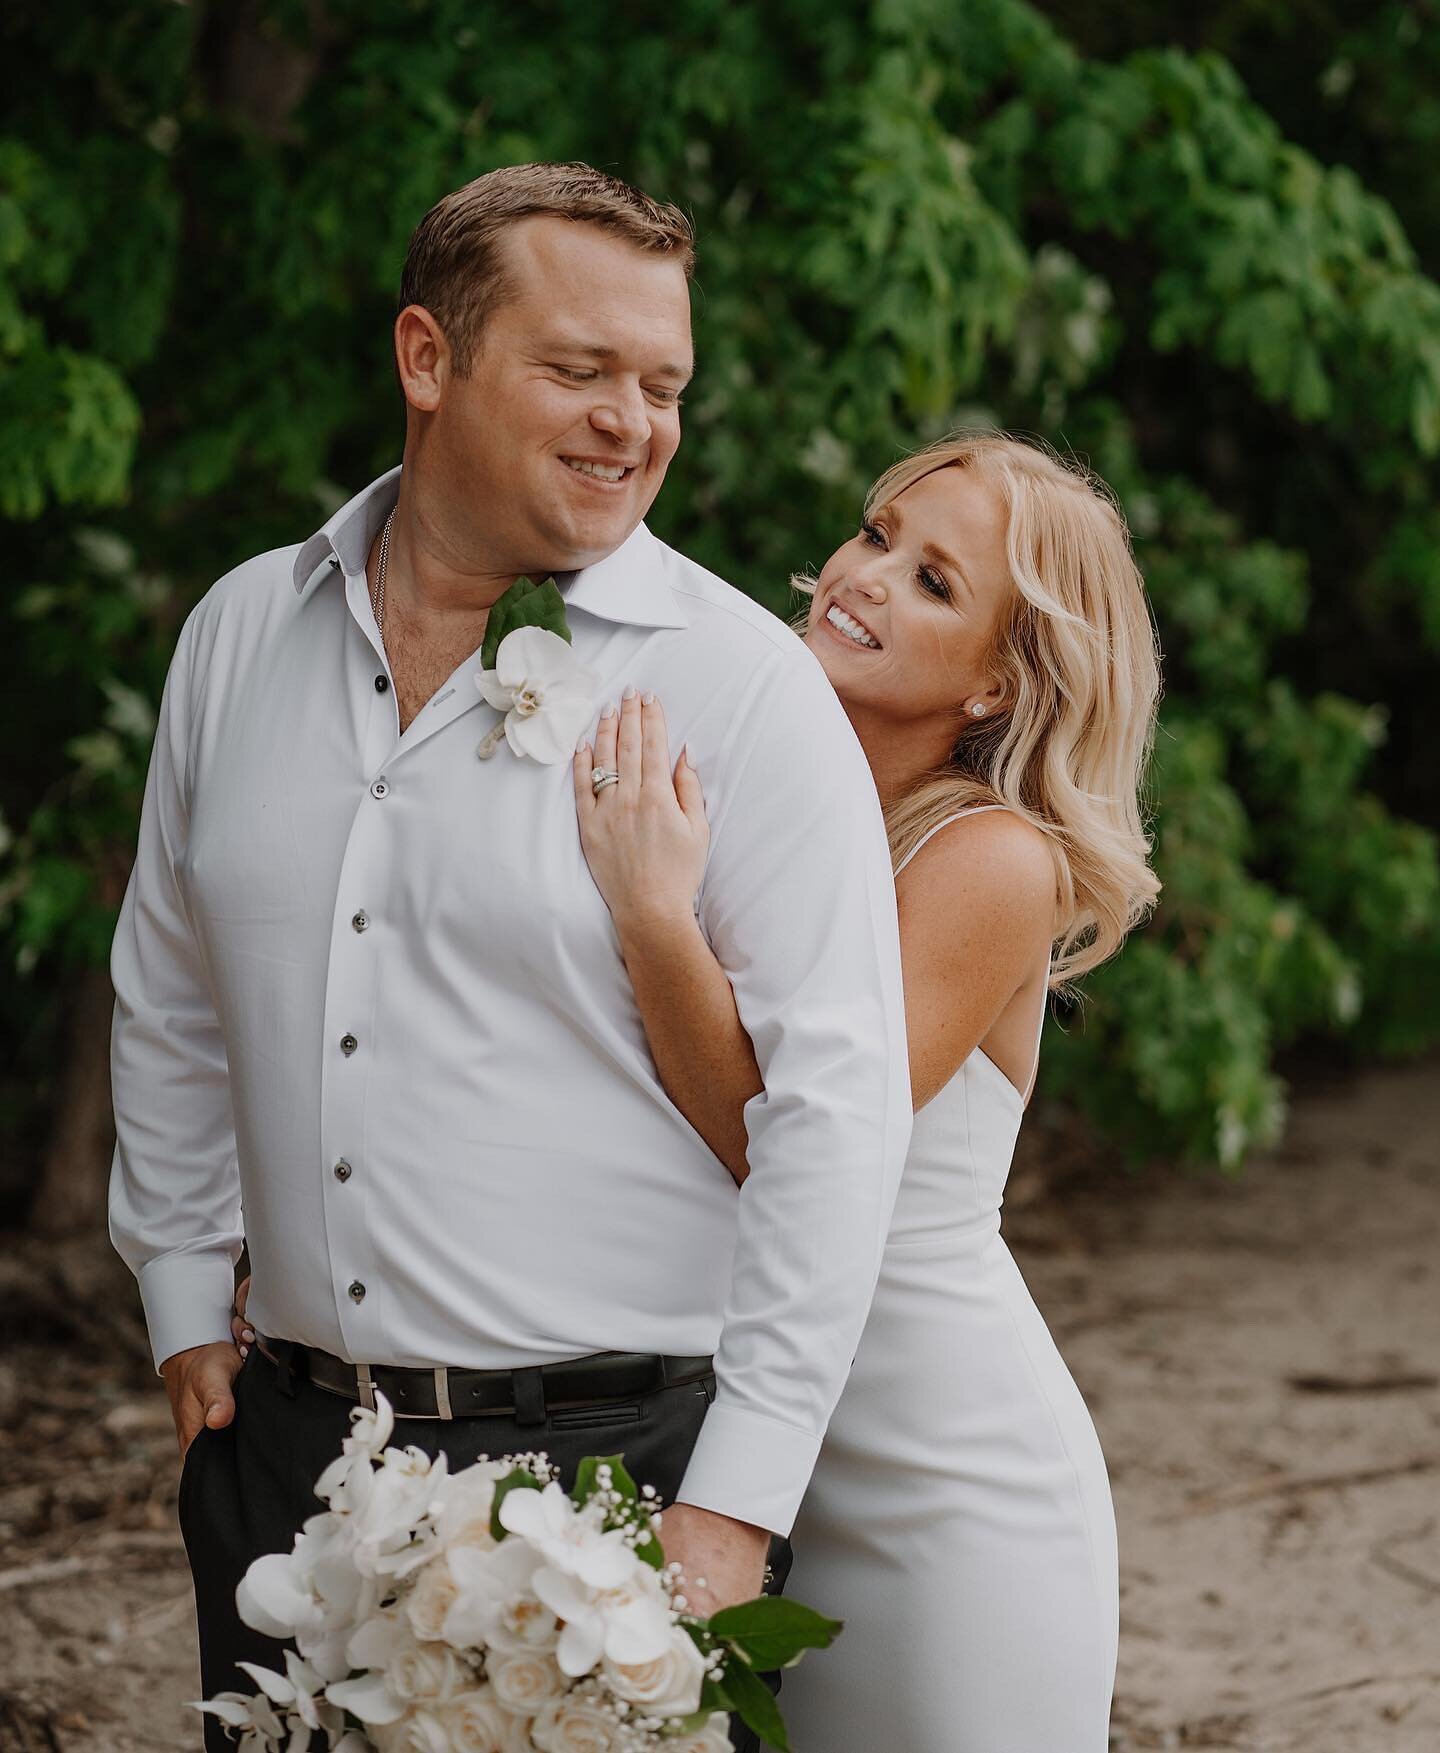 these two had a perfect day for their intimate wedding with family!